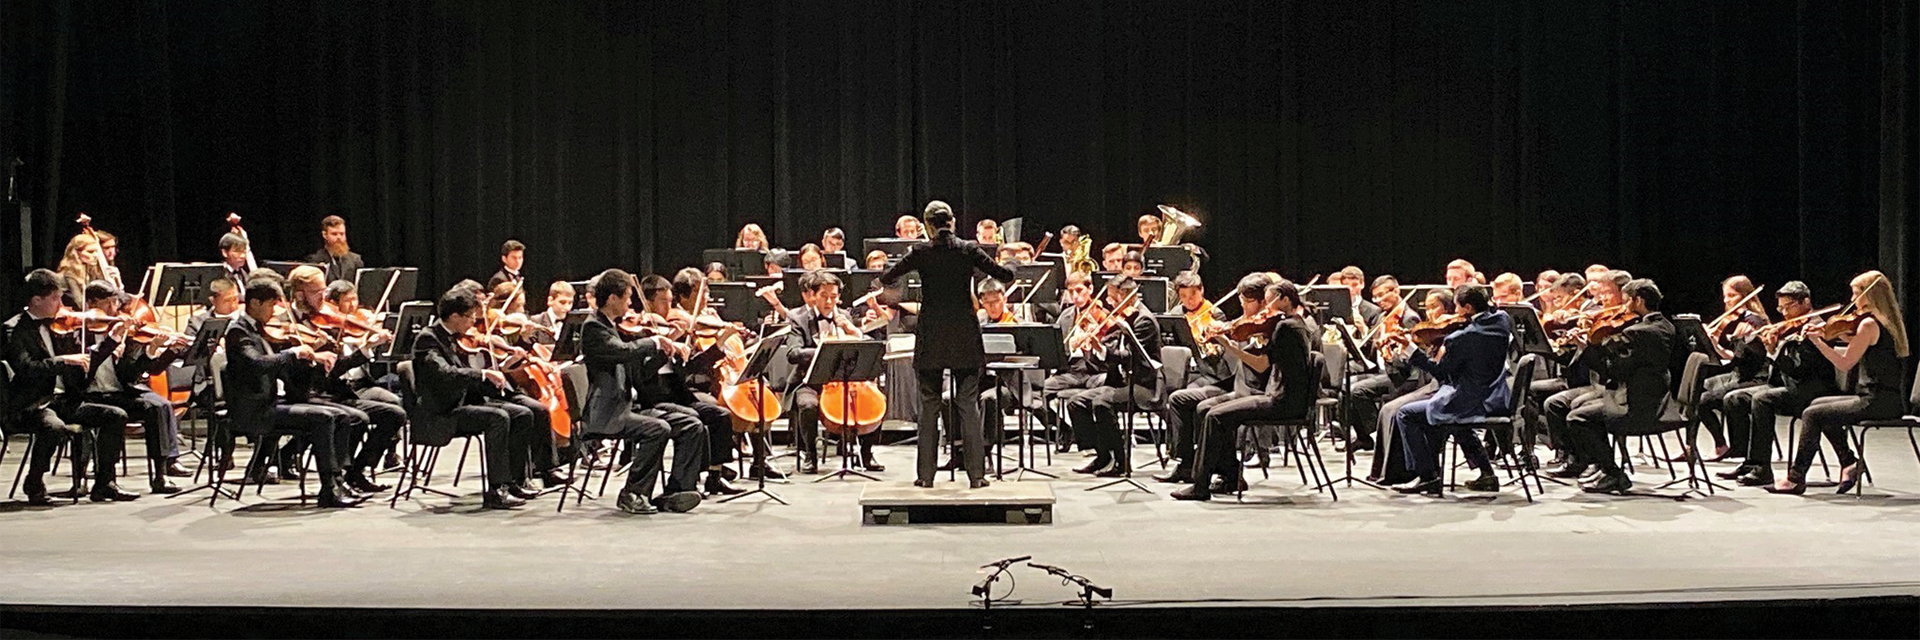 The Georgia Tech Symphony Orchestra performing at the Ferst Center